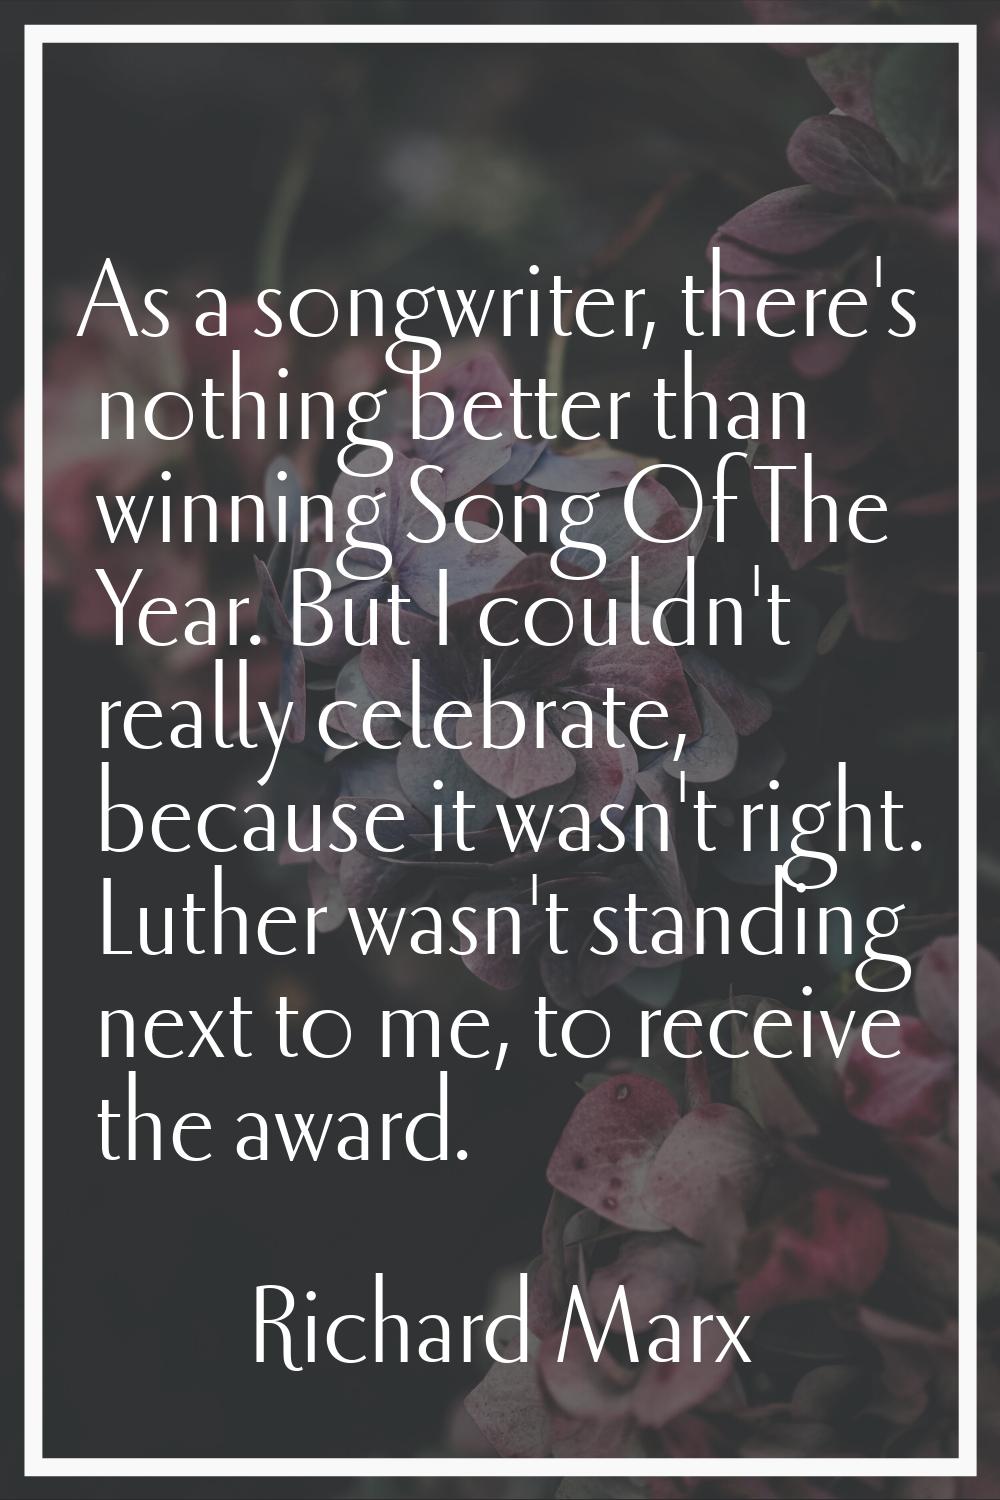 As a songwriter, there's nothing better than winning Song Of The Year. But I couldn't really celebr